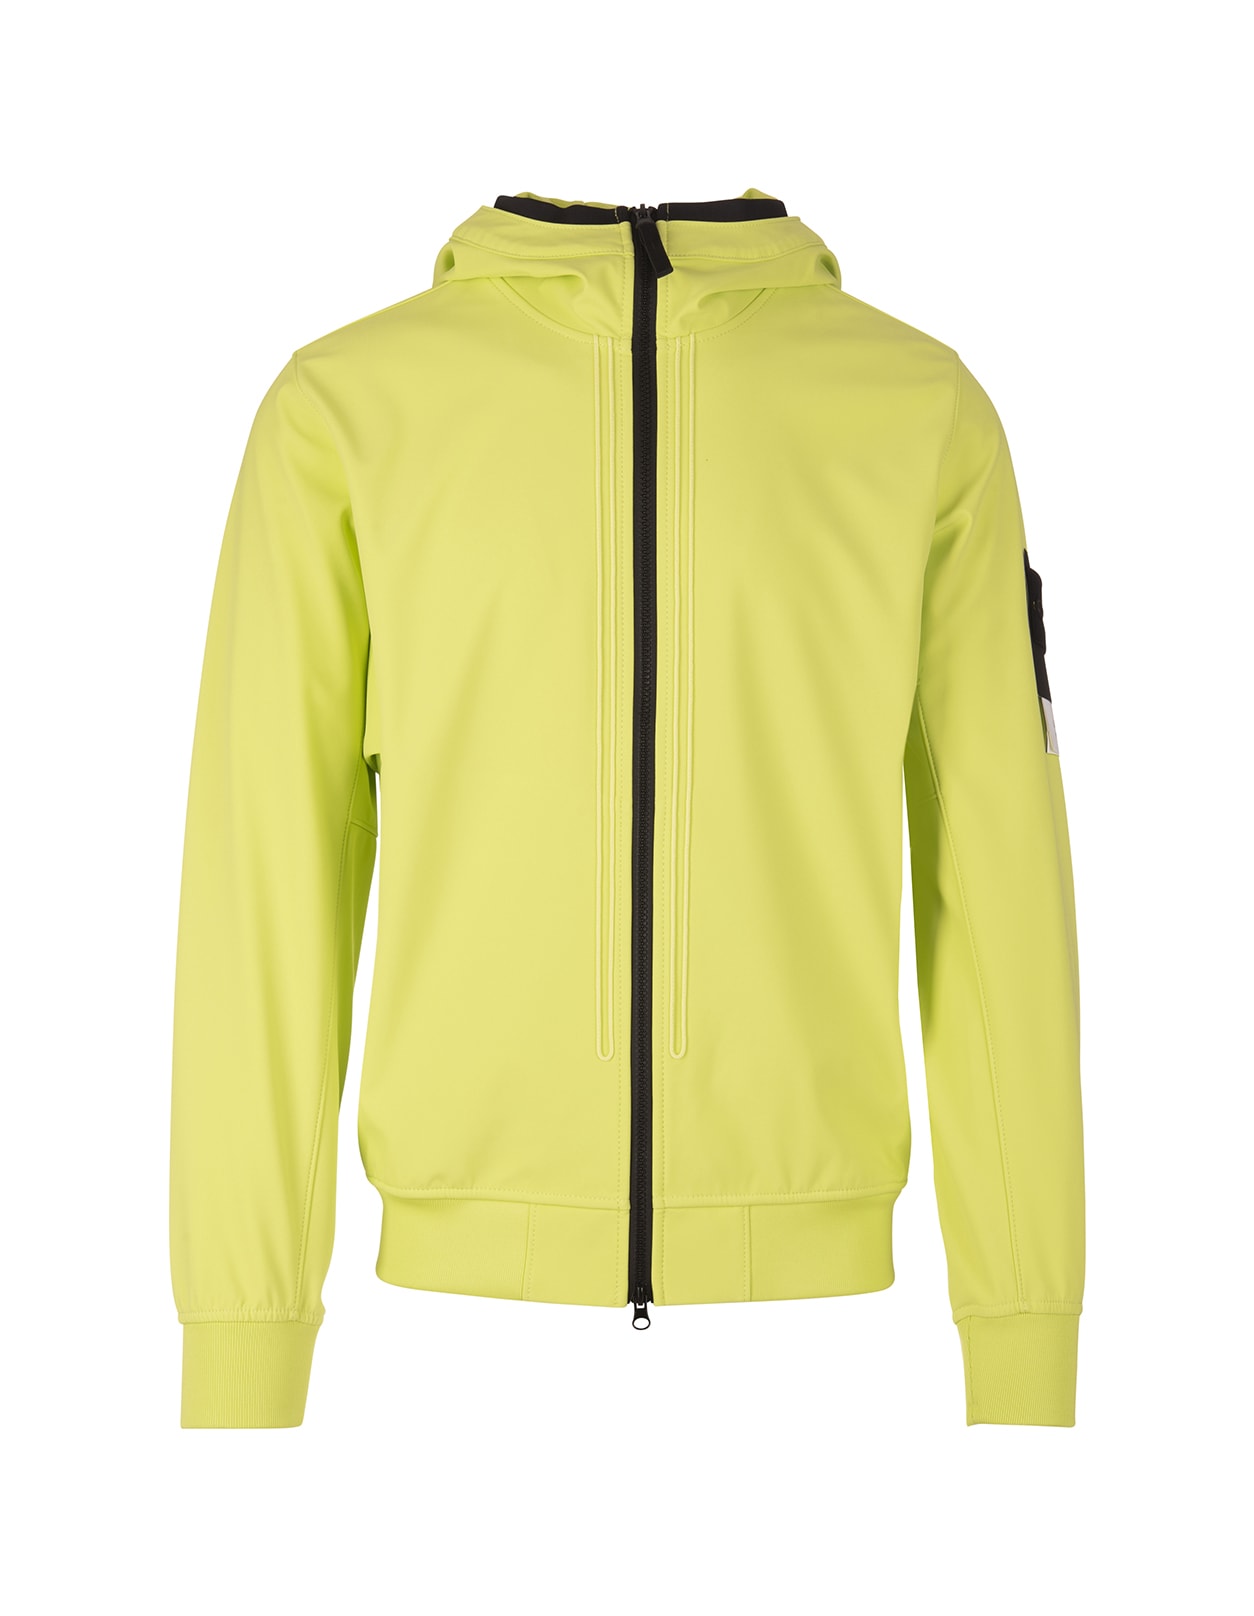 Stone Island Man Fluo Yellow Jacket In Light Soft Shell-r